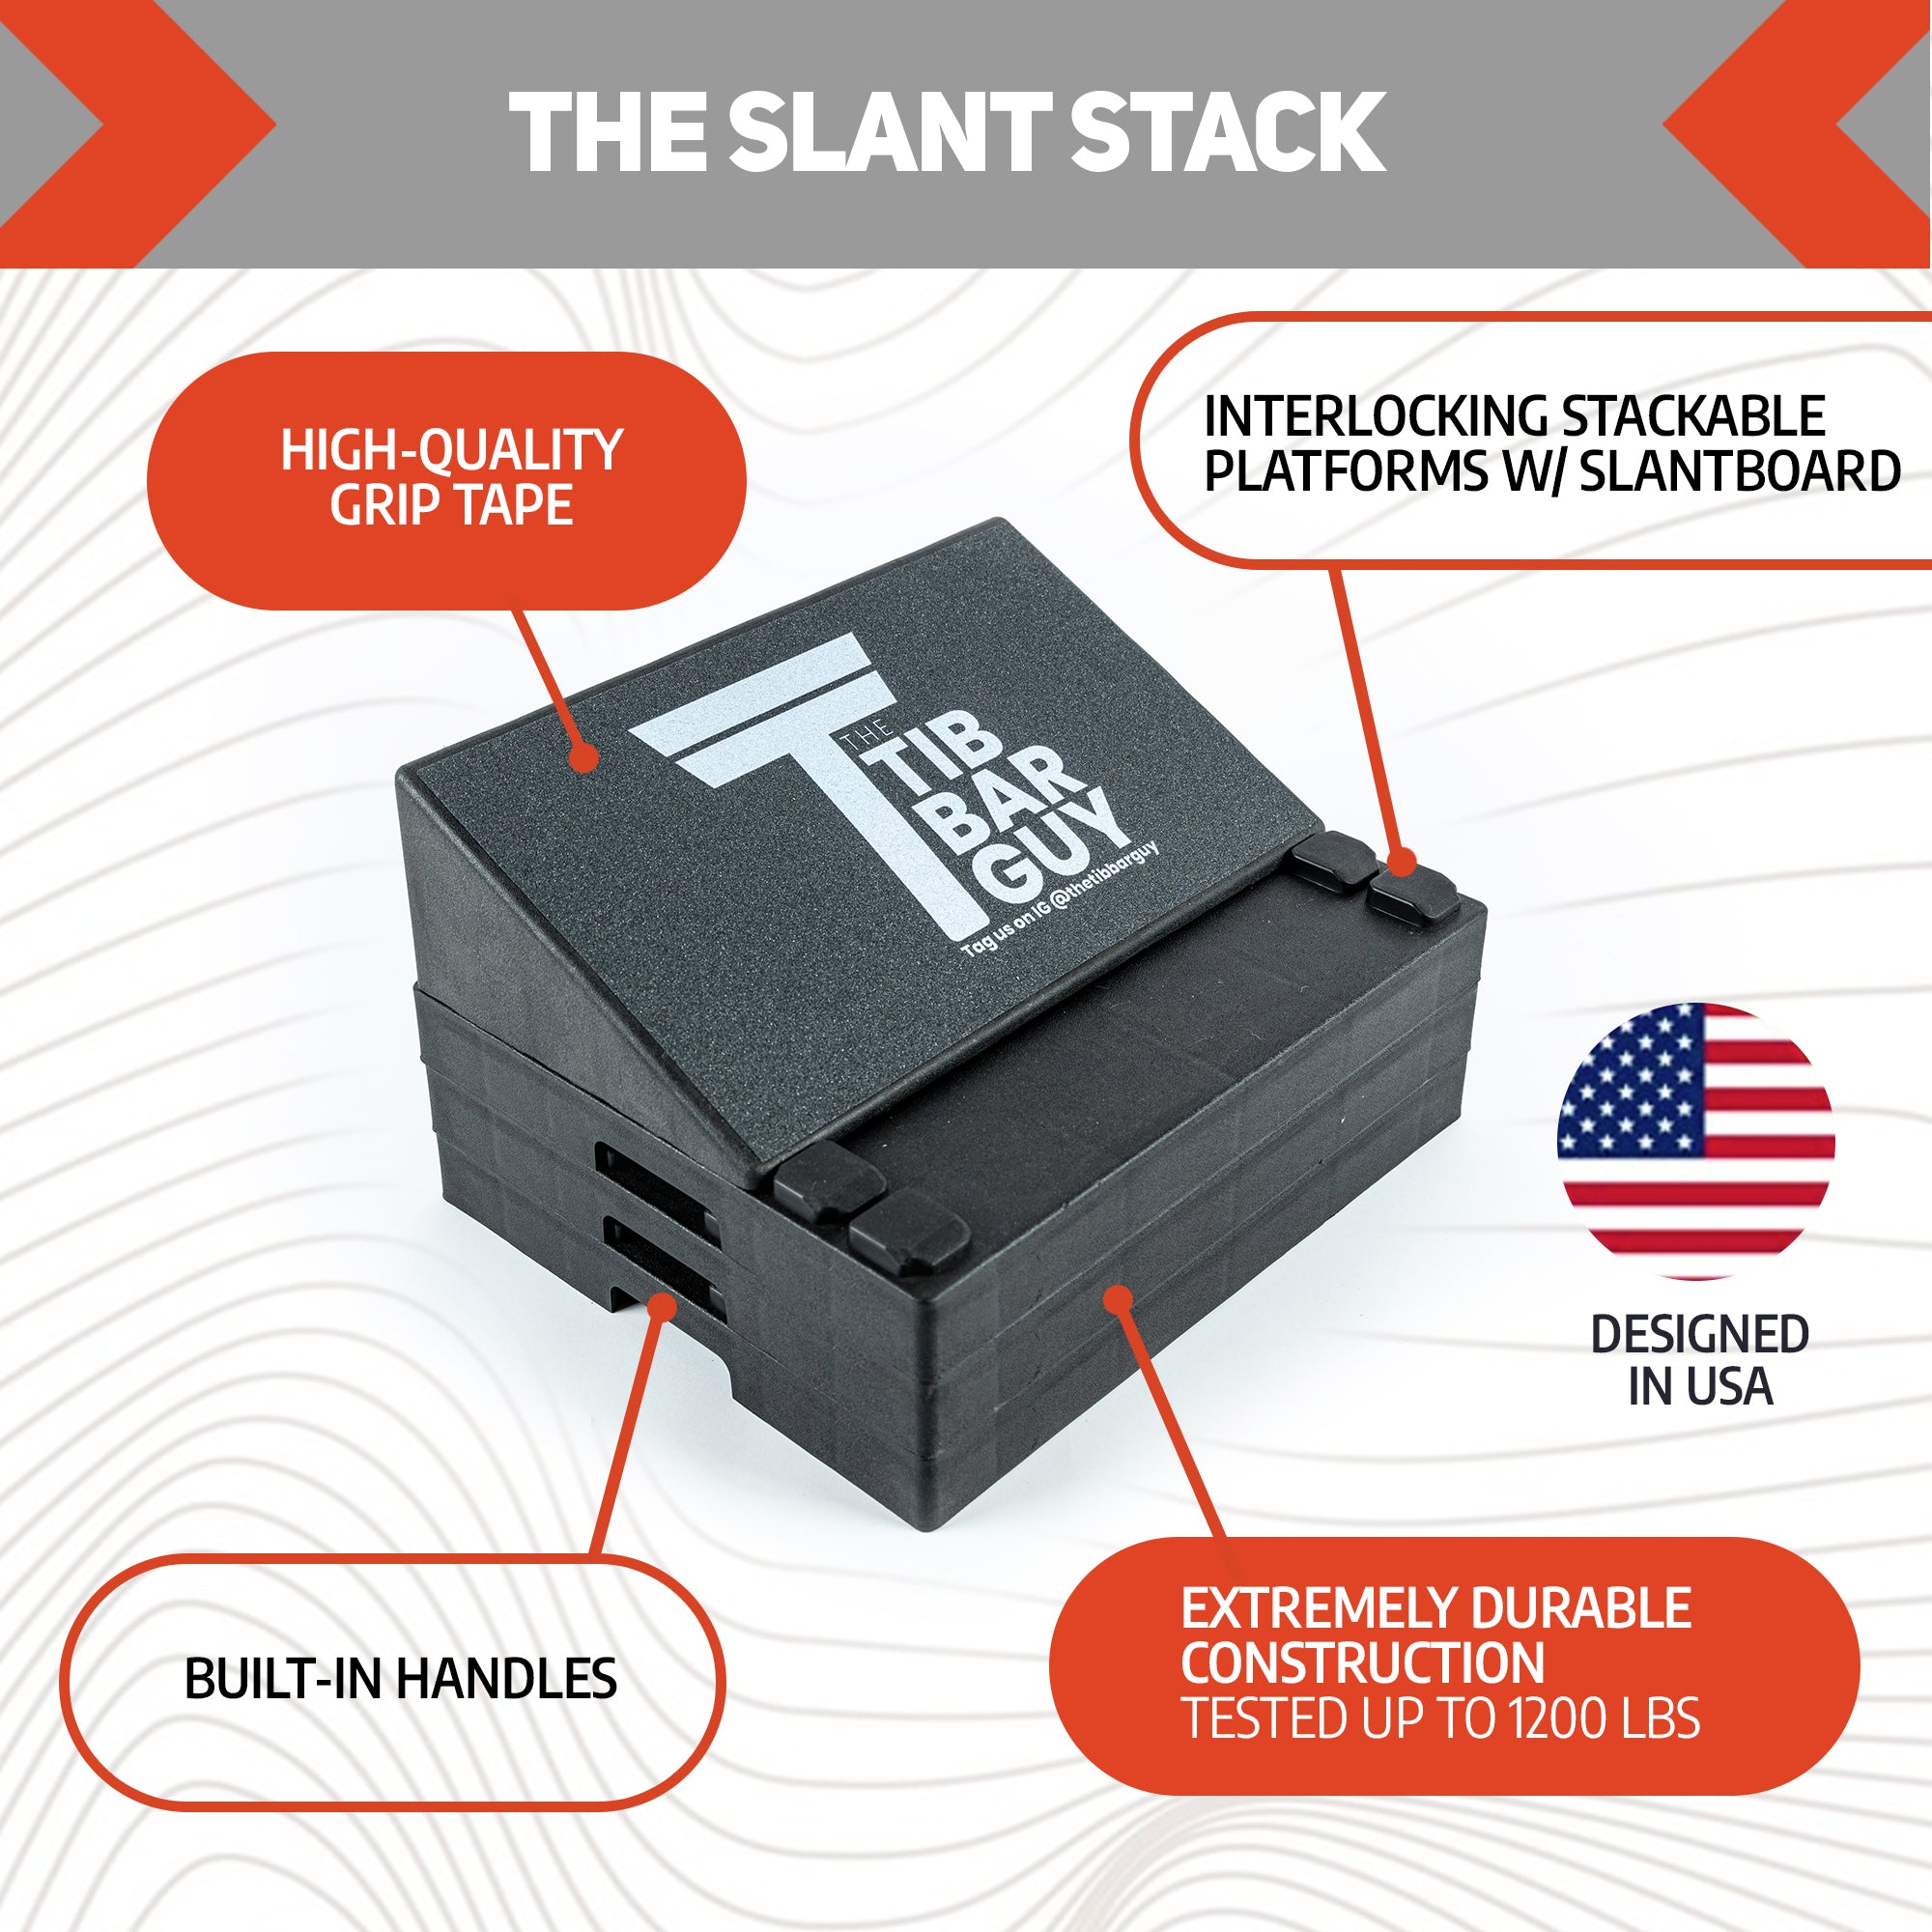 Benefits Of The Slant Stack Created By The Tib Bar Guy